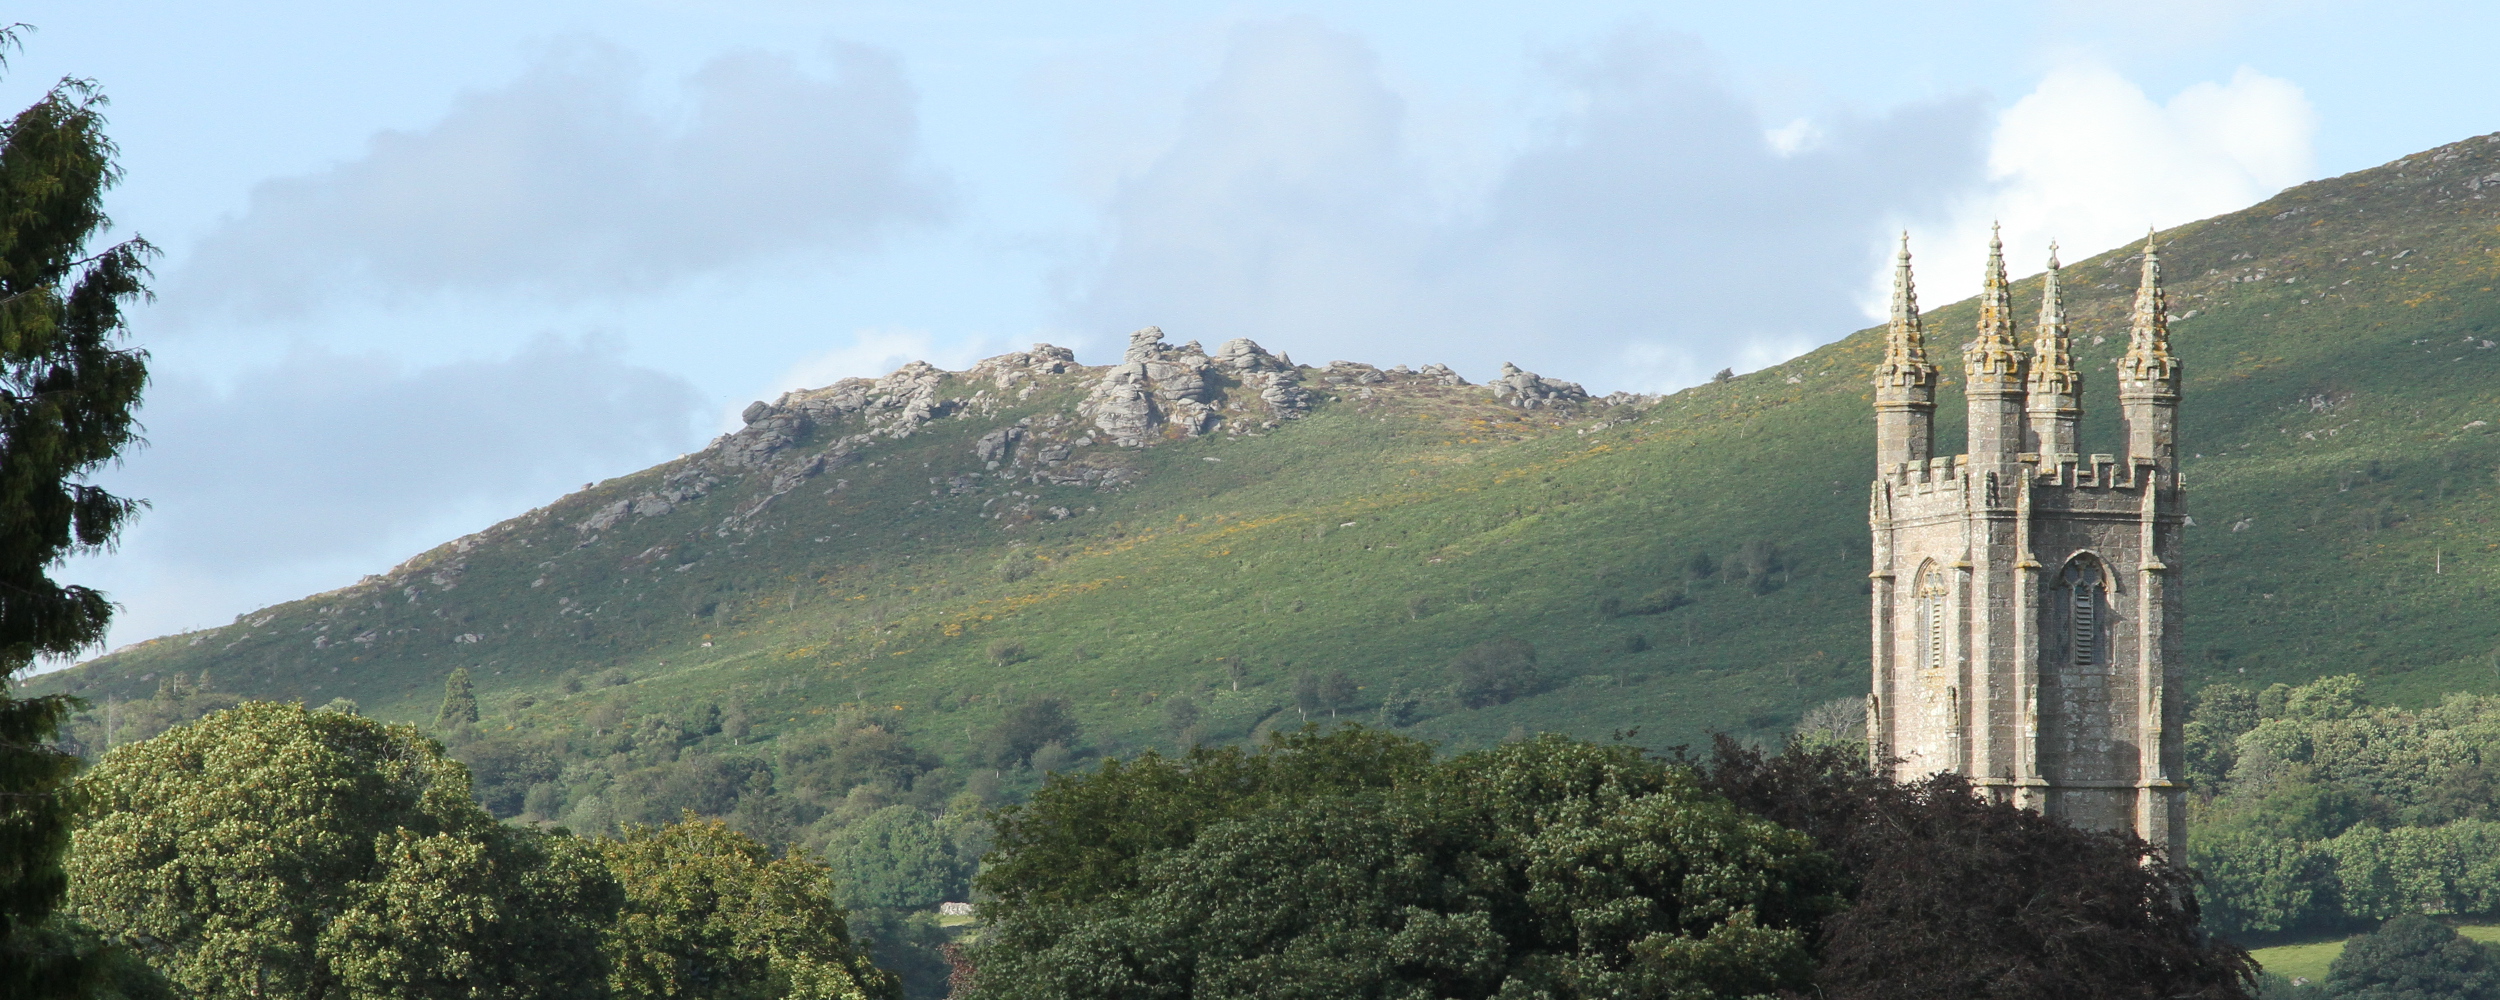 Widecombe Church Tower with Honeybag Tor in the Background